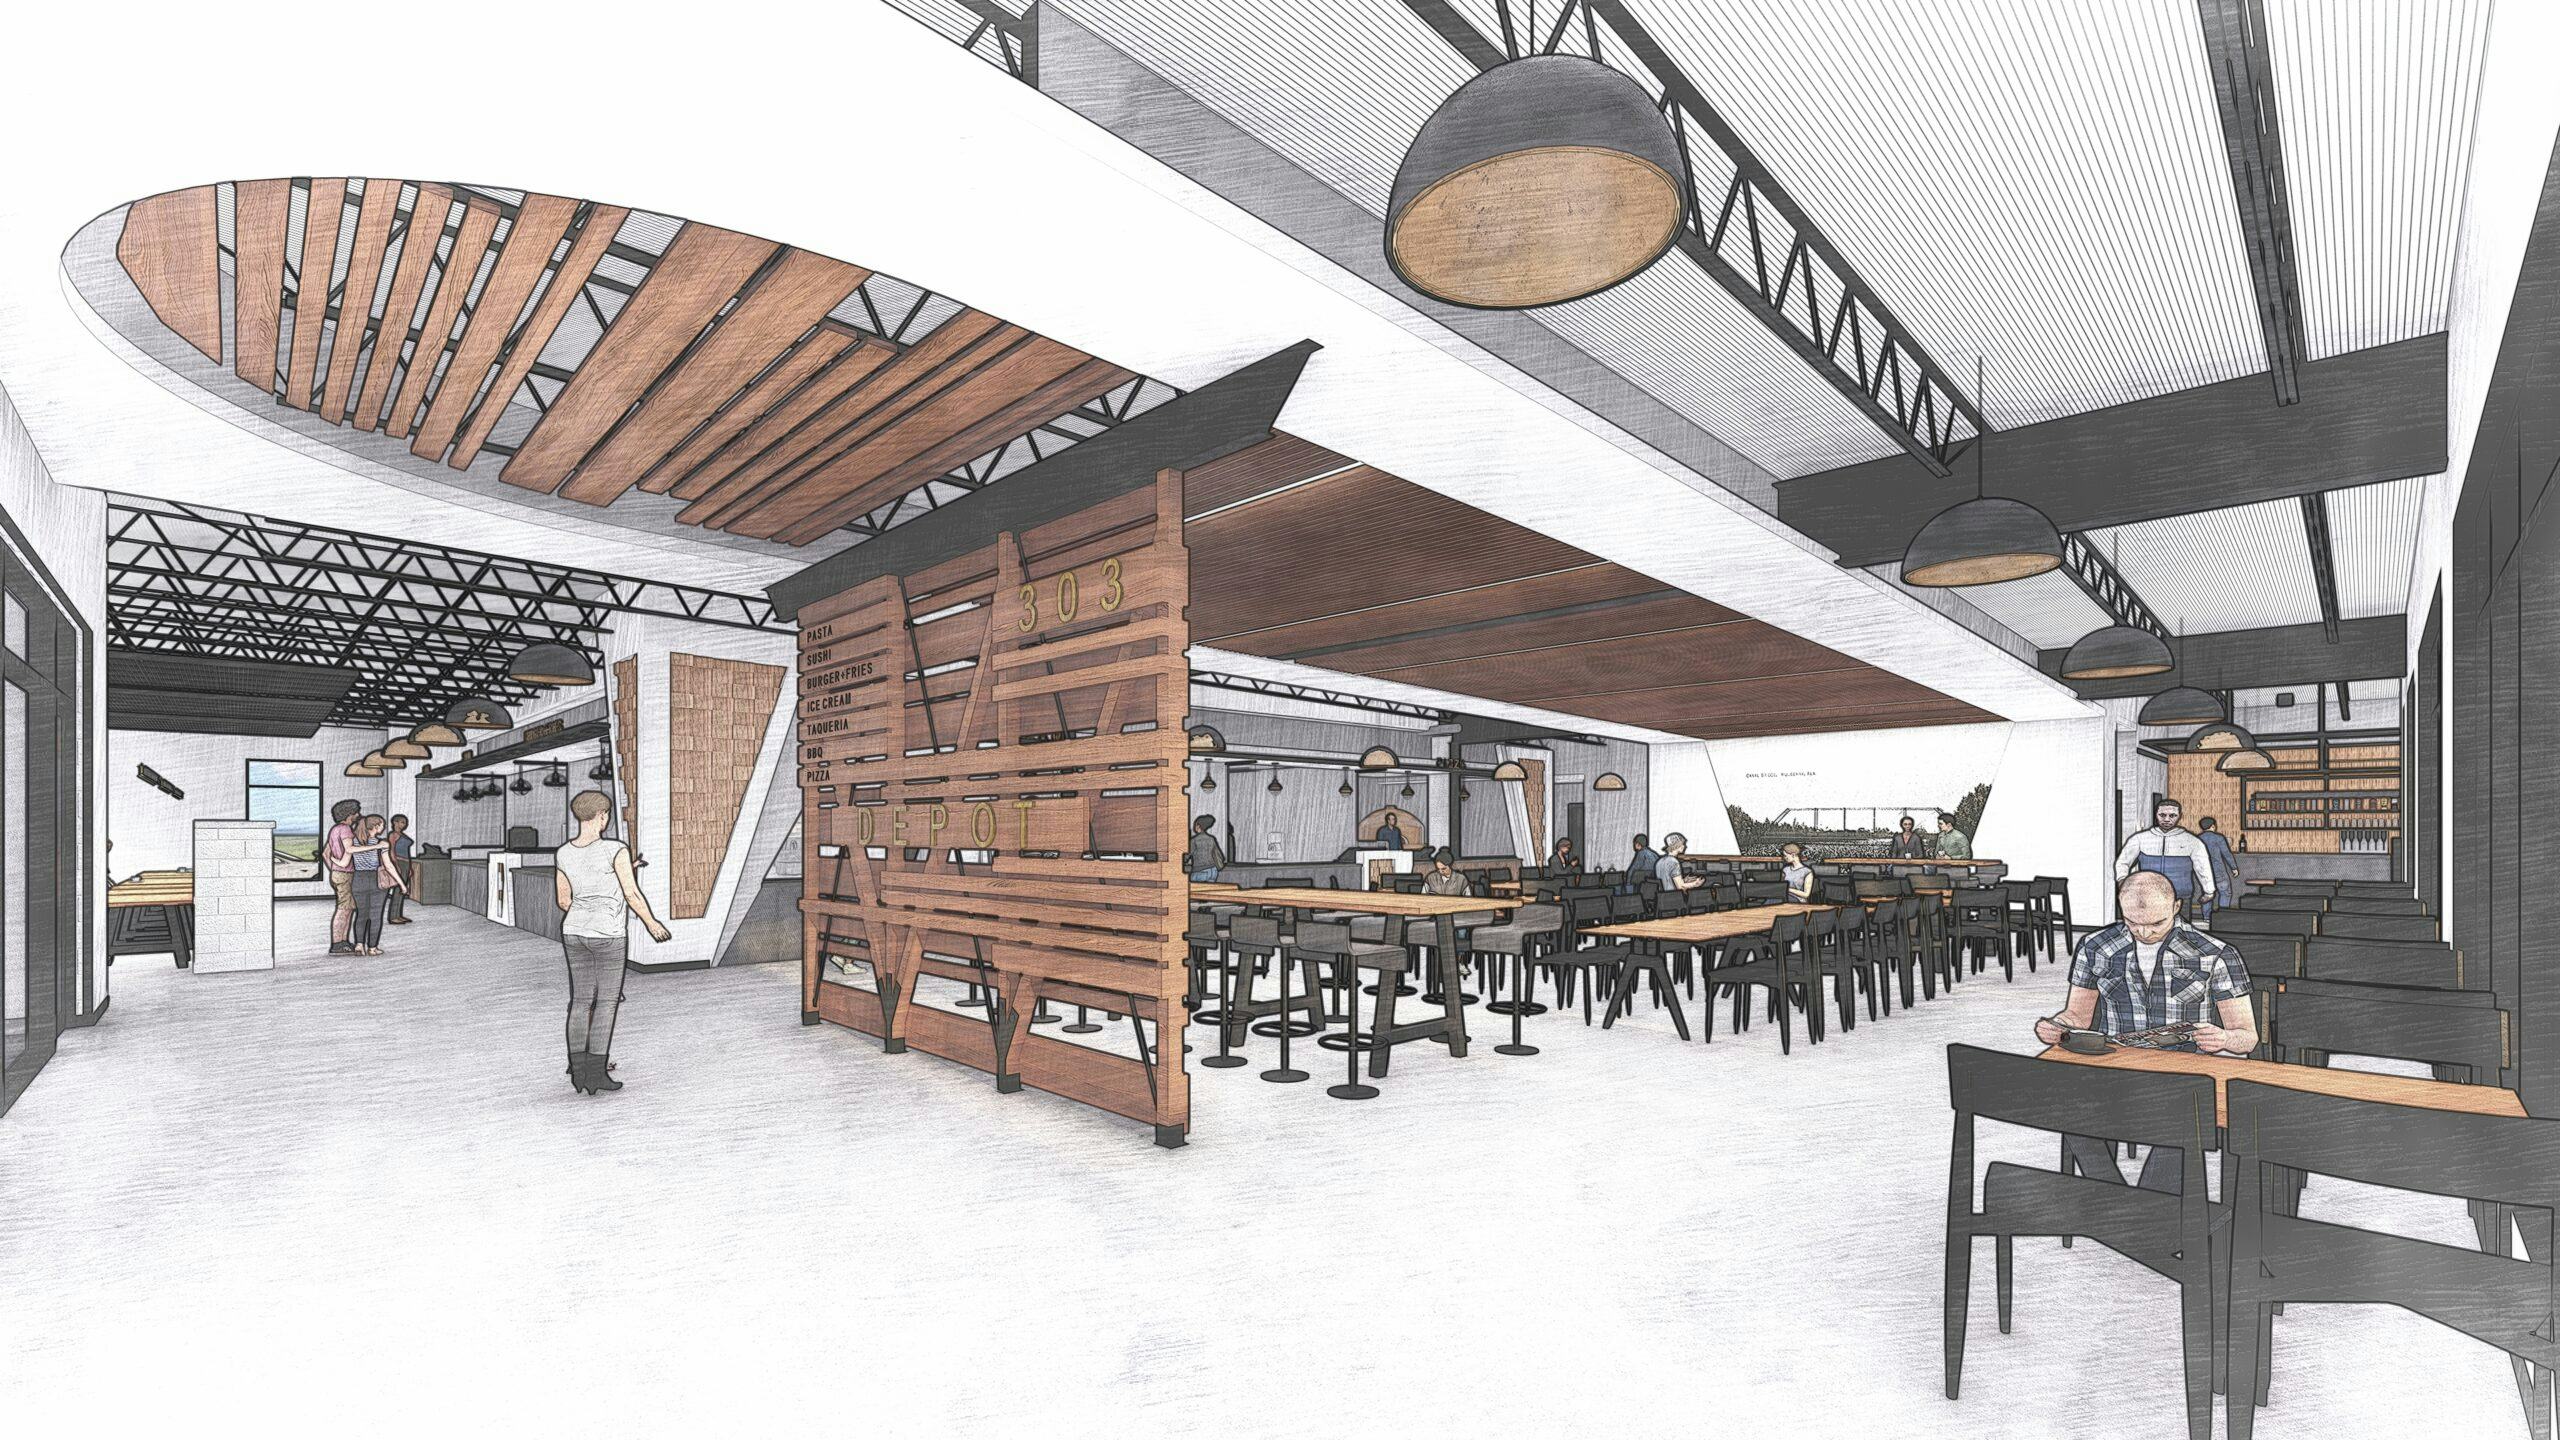 The Depot 303 rendering - Courtesy of Straughn Trout Architects